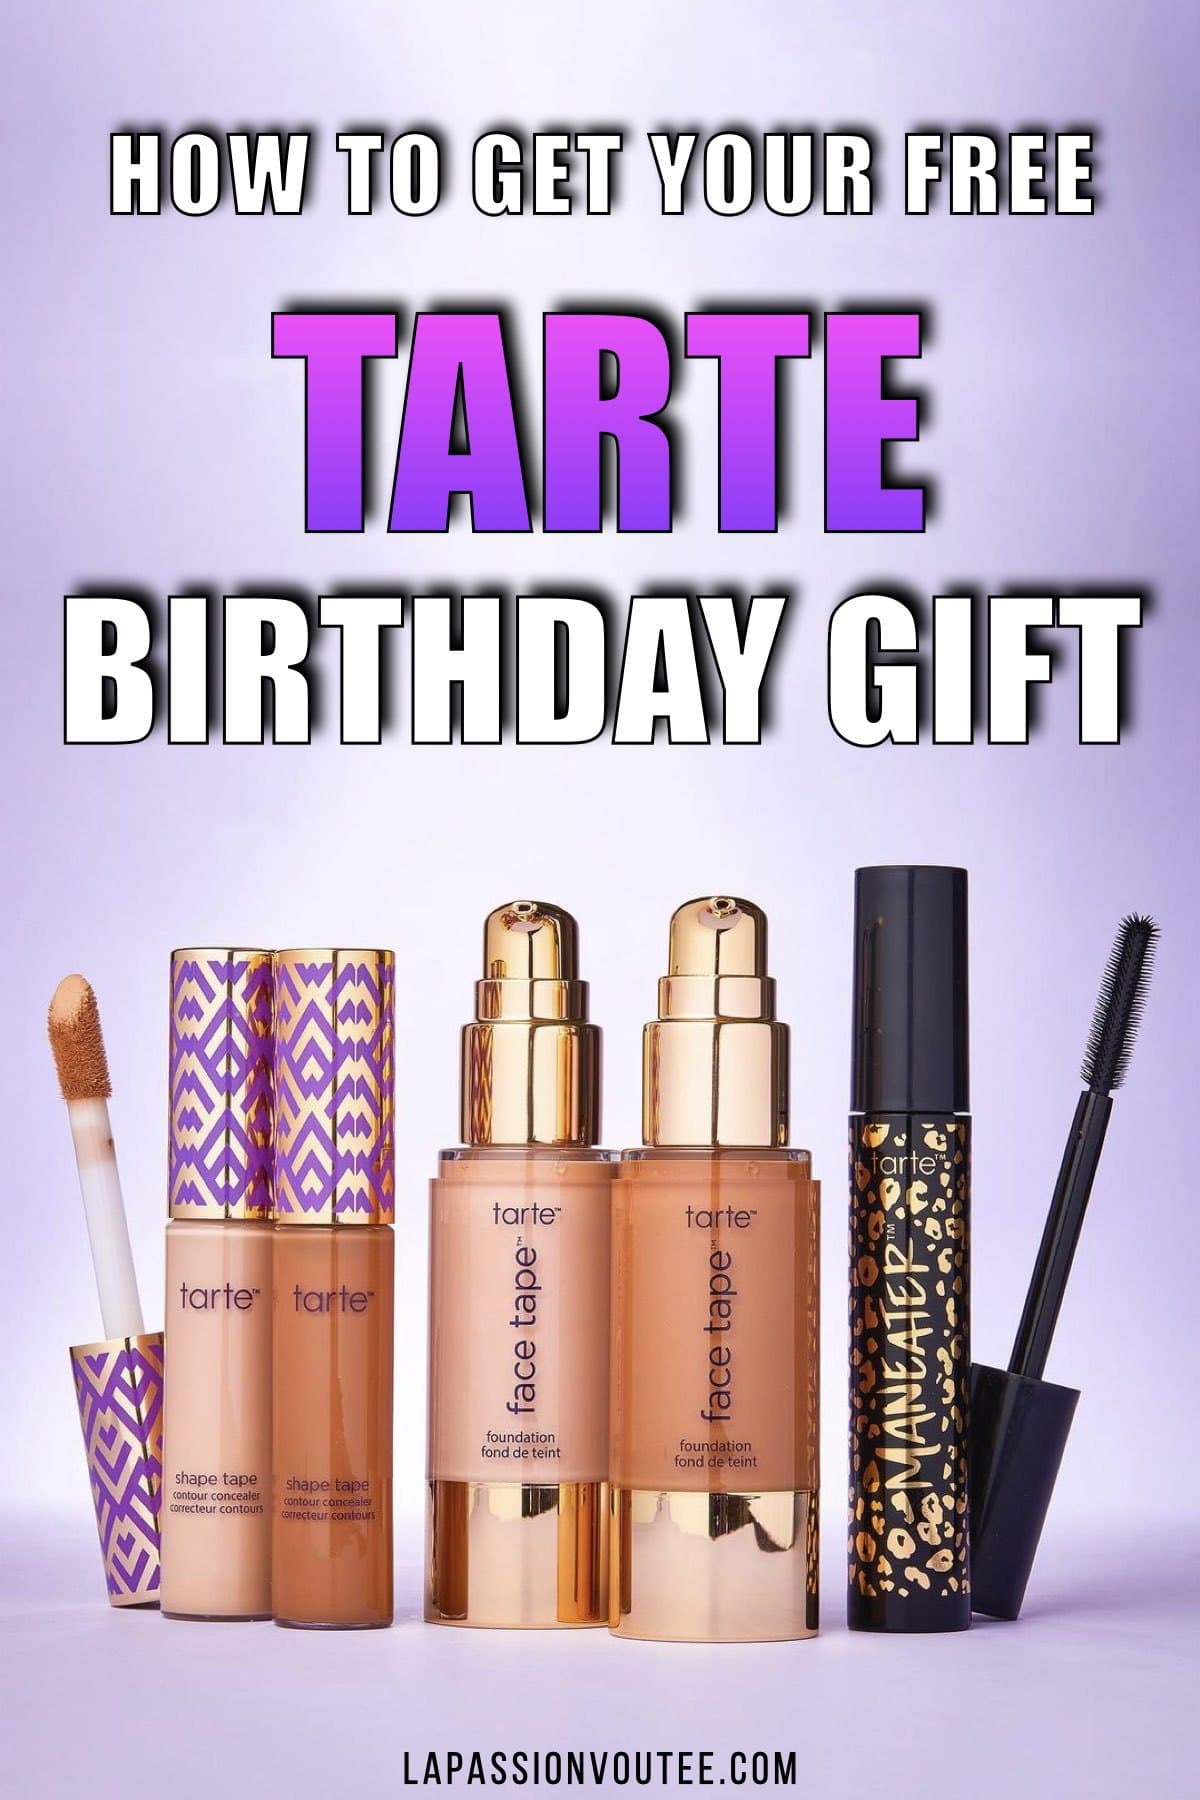 How to get your FREE Tarte Birthday Gift